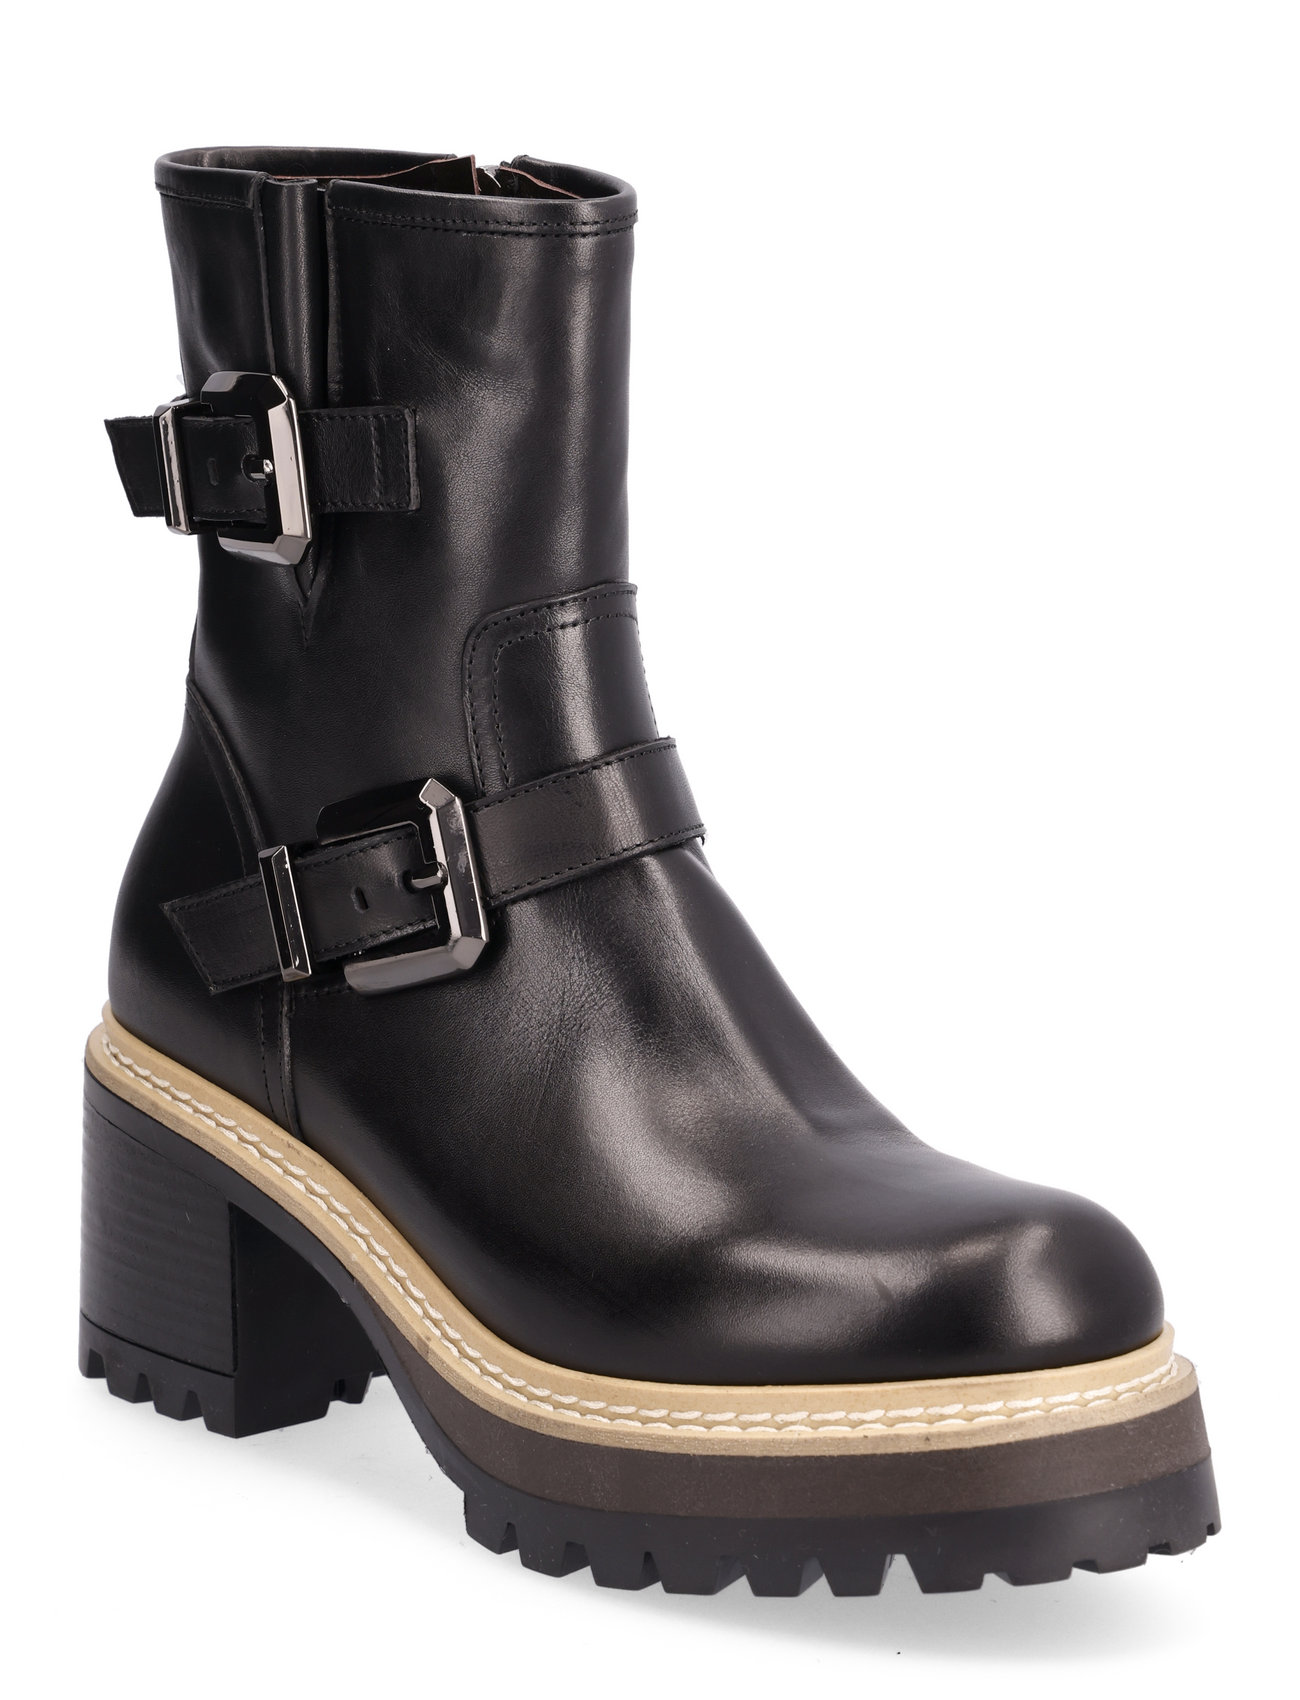 Laura Bellariva Boots Heeled Ankle Boots